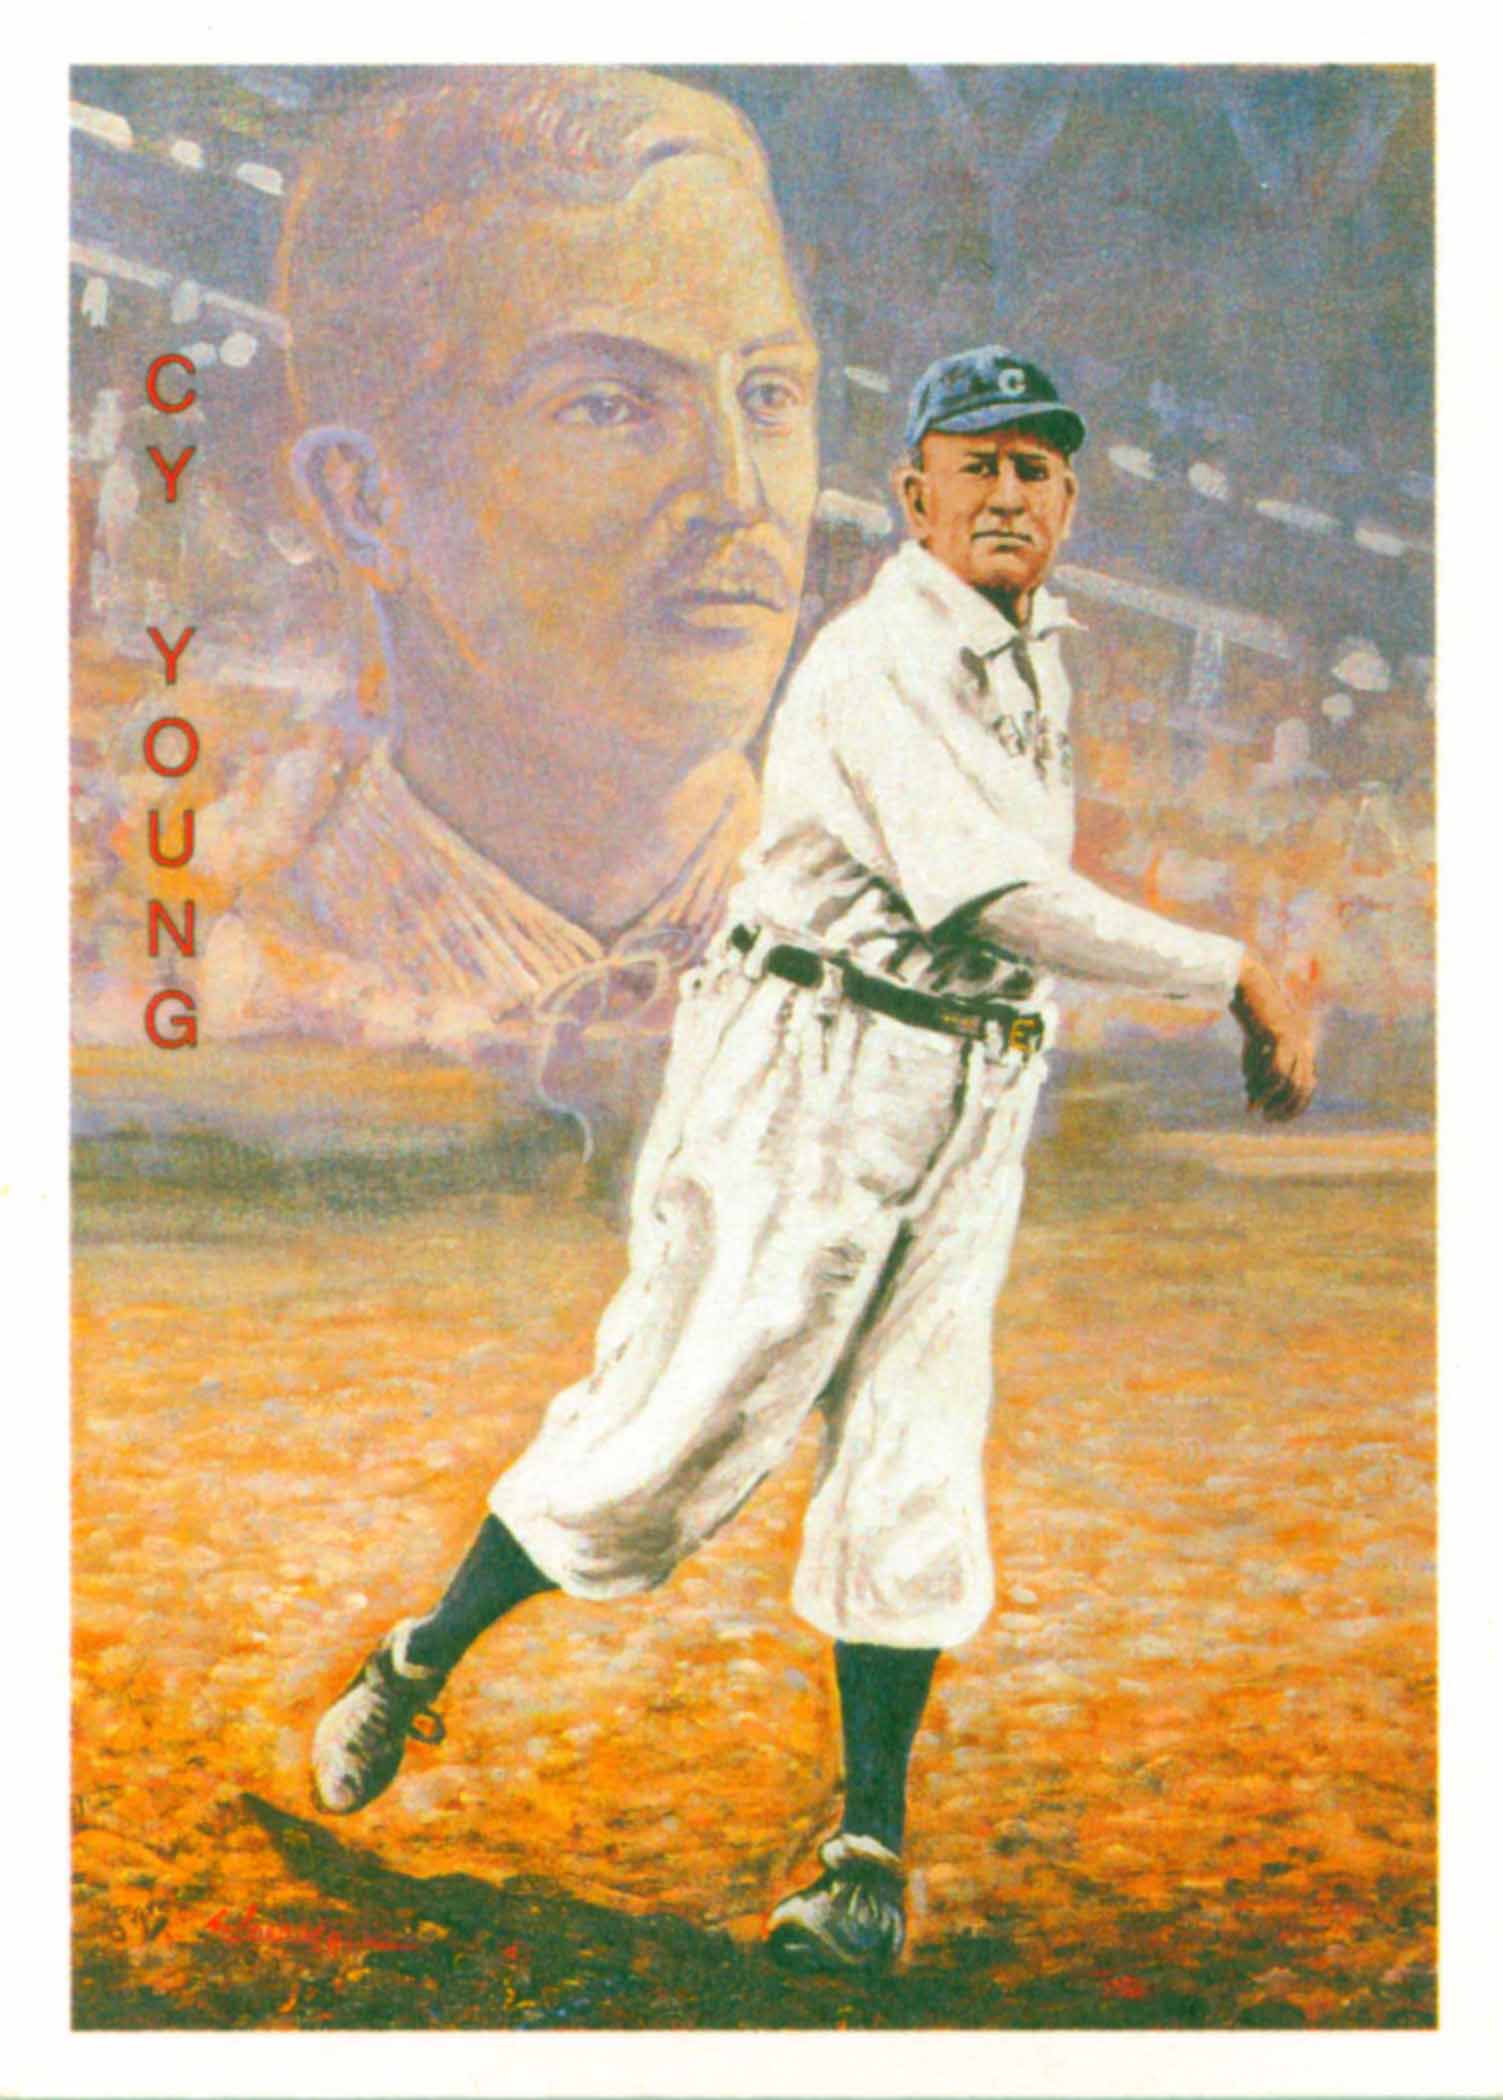 1994 Ted Williams Locklear Collection